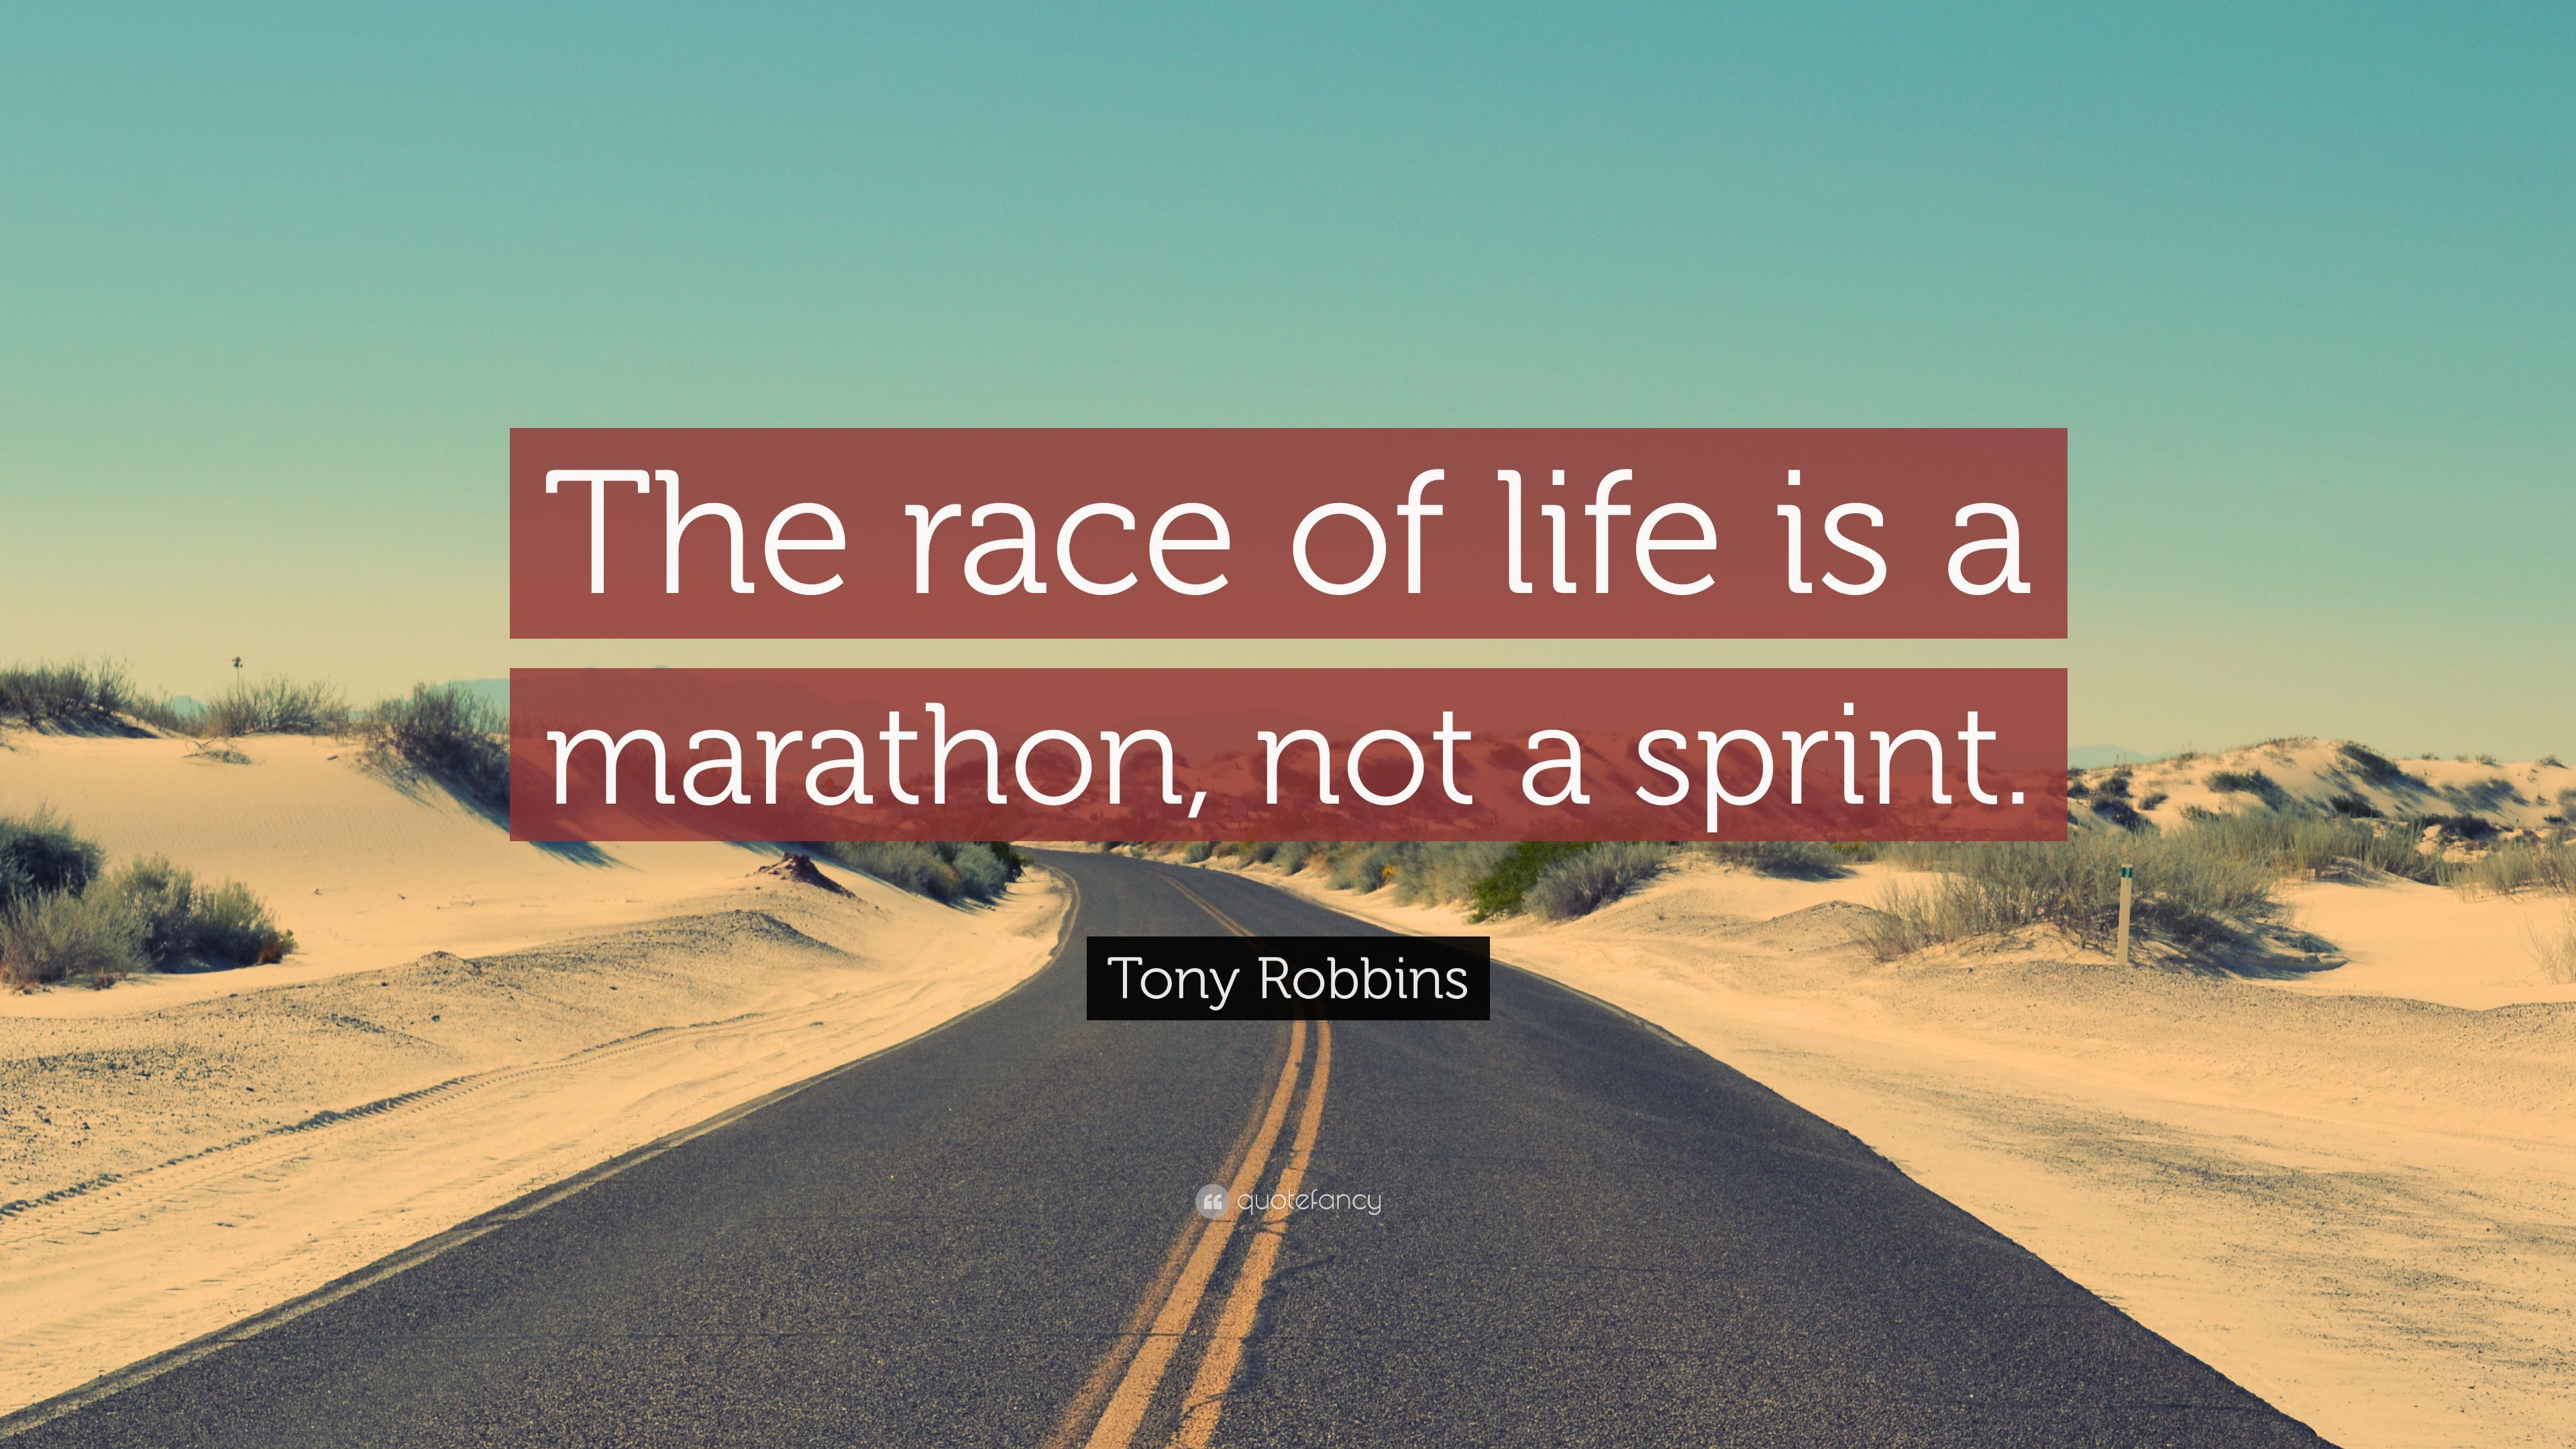 Tony Robbins Quote: “The race of life is a marathon, not a sprint